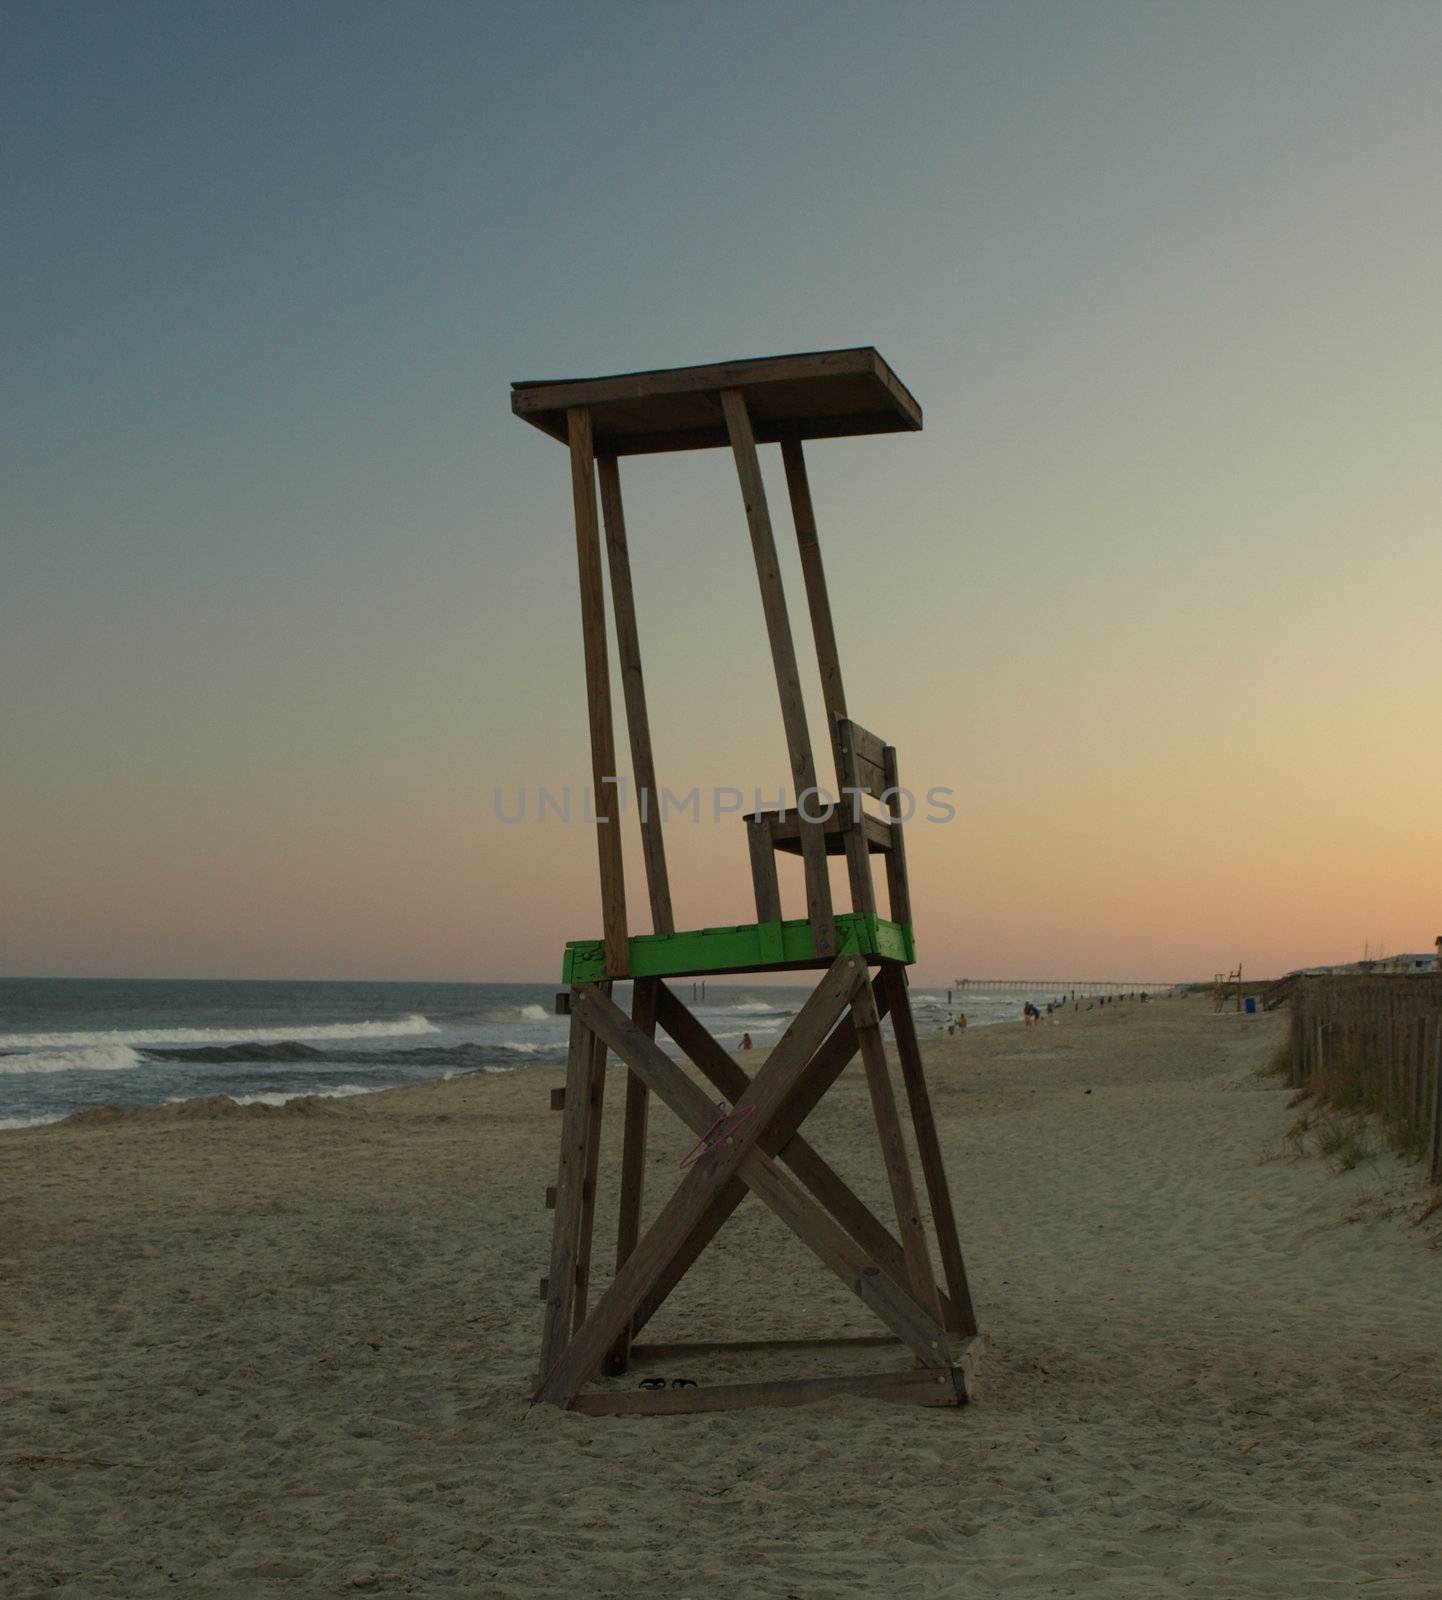 An empty lifegaurd chair at the end of a long summers day.